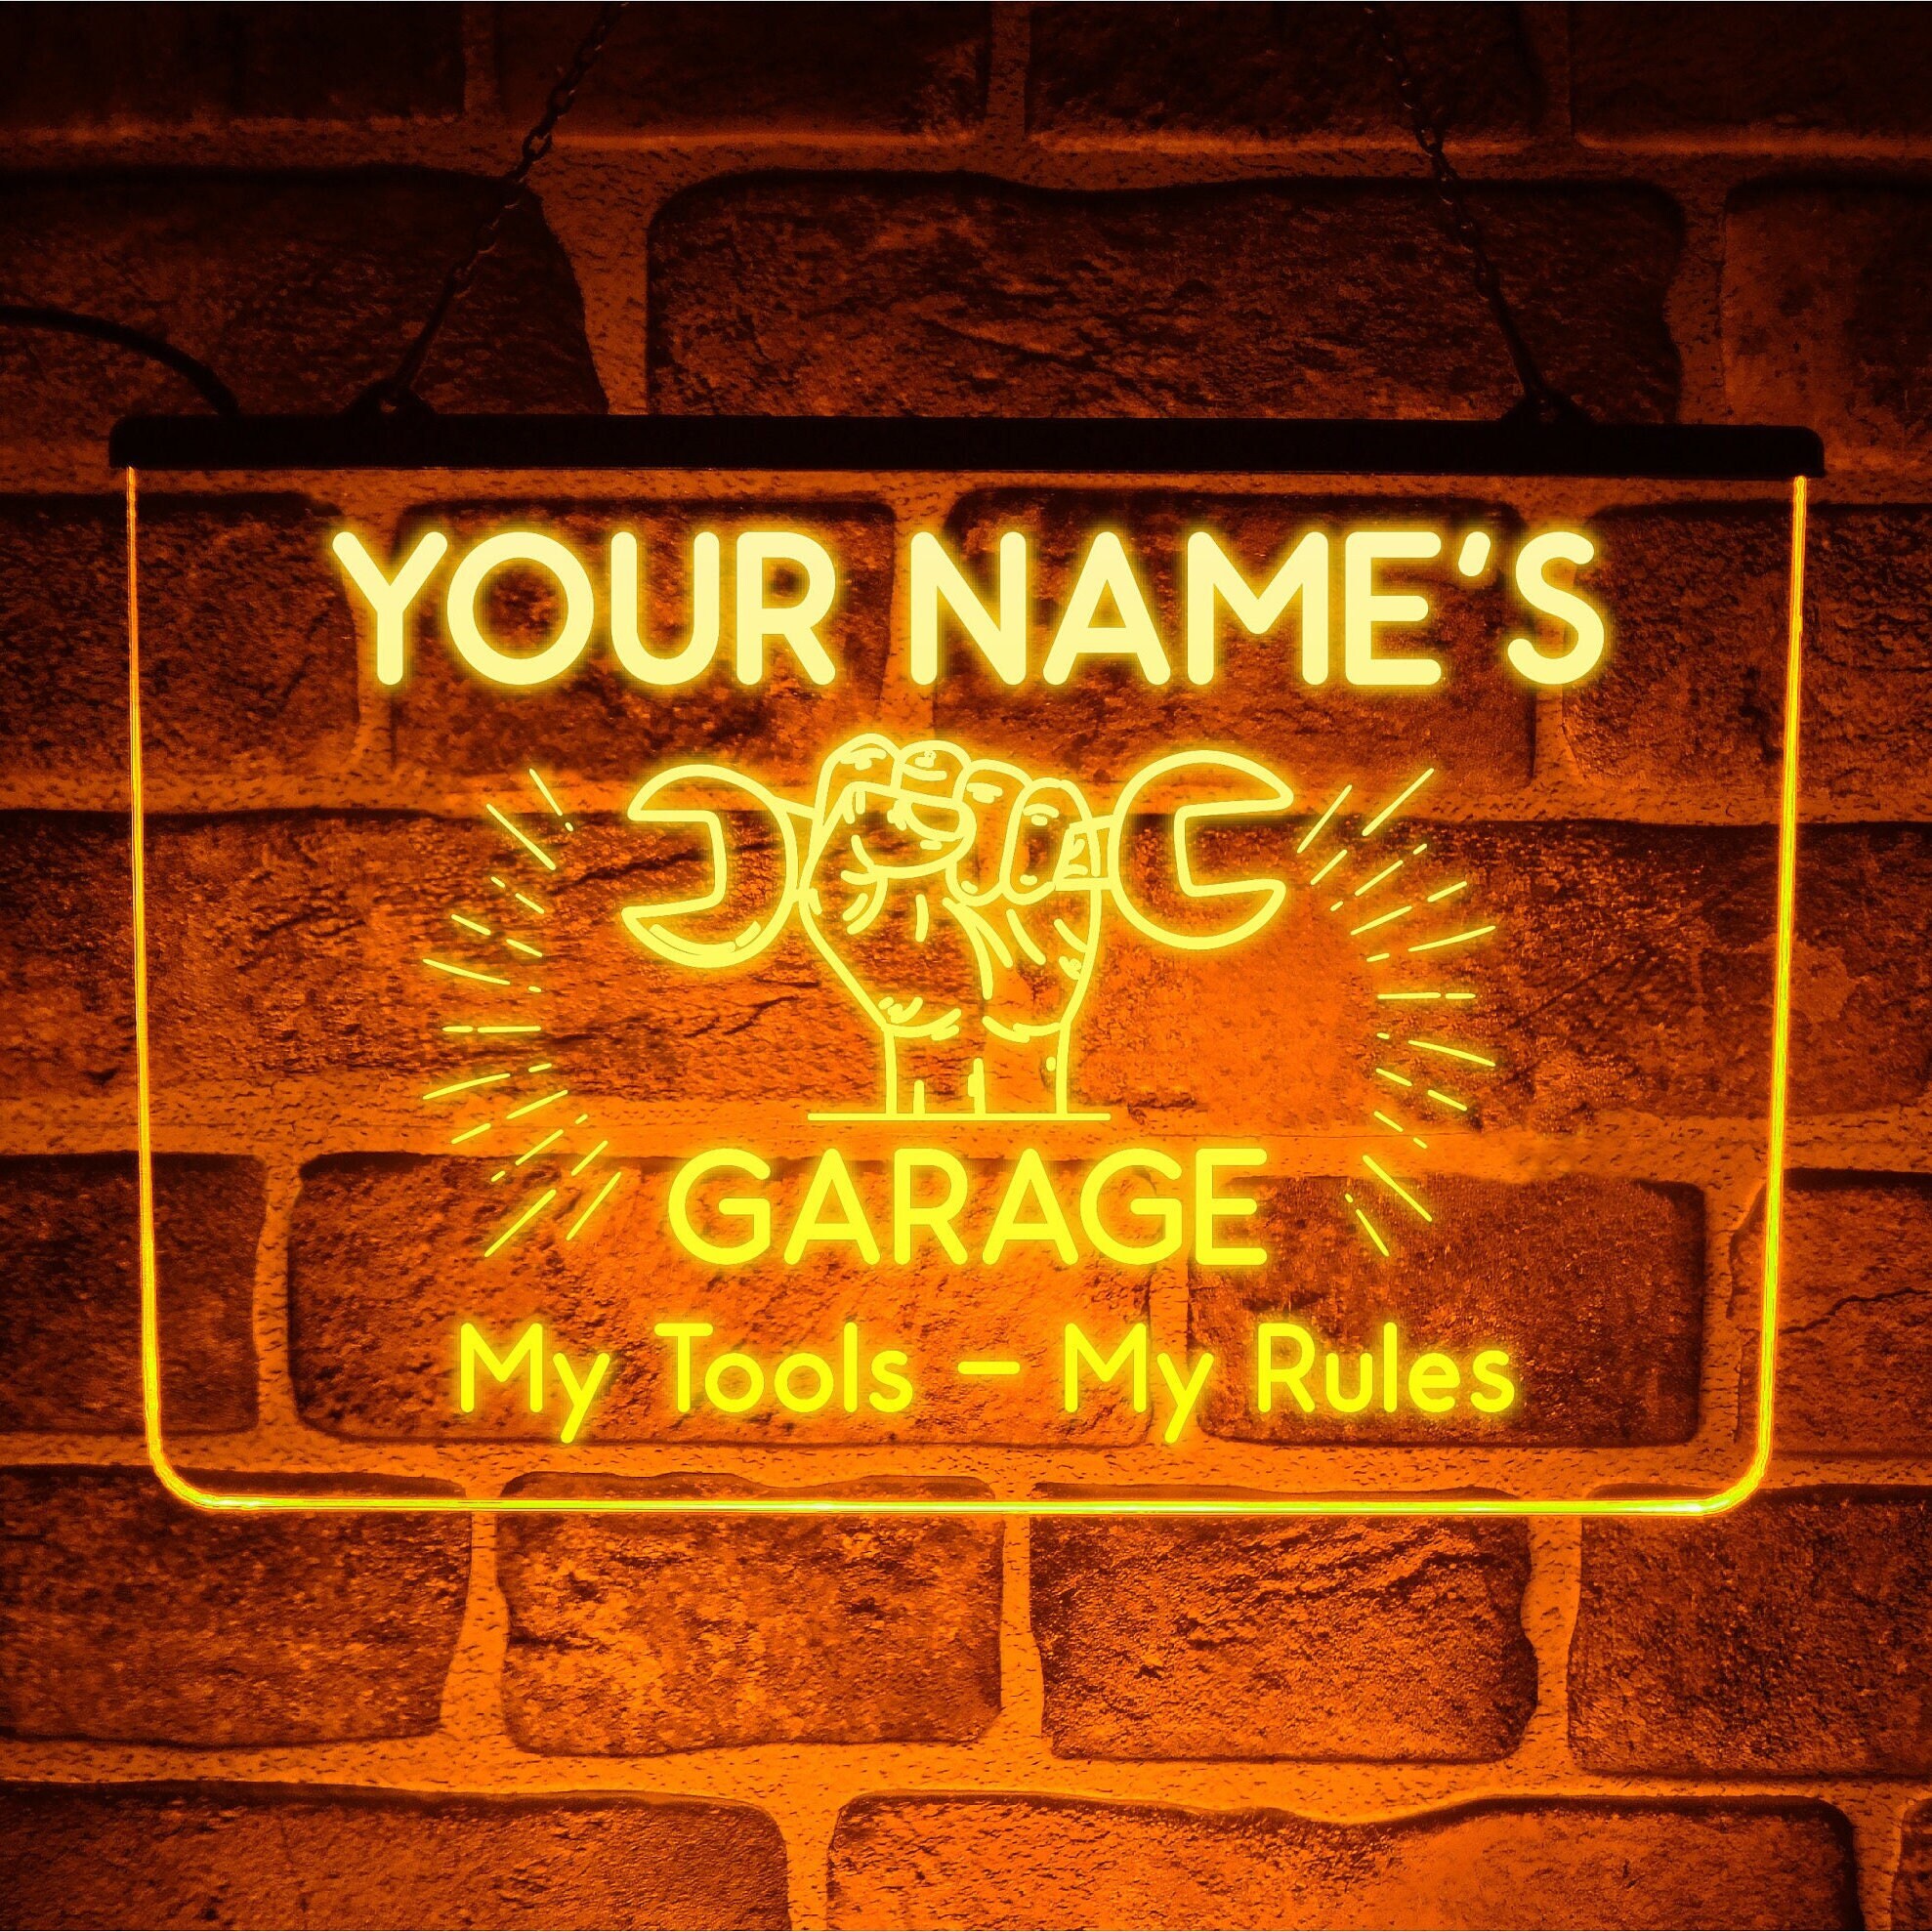 Car Gearbox Neon Sign, Neon Manual Gearbox Design, LED Garage Lamp Neon  Lights for Wall Decor, Man Cave Garage Decor, USB Neon Sign for Auto Room  Garage Repair Shop Gifts for Husband